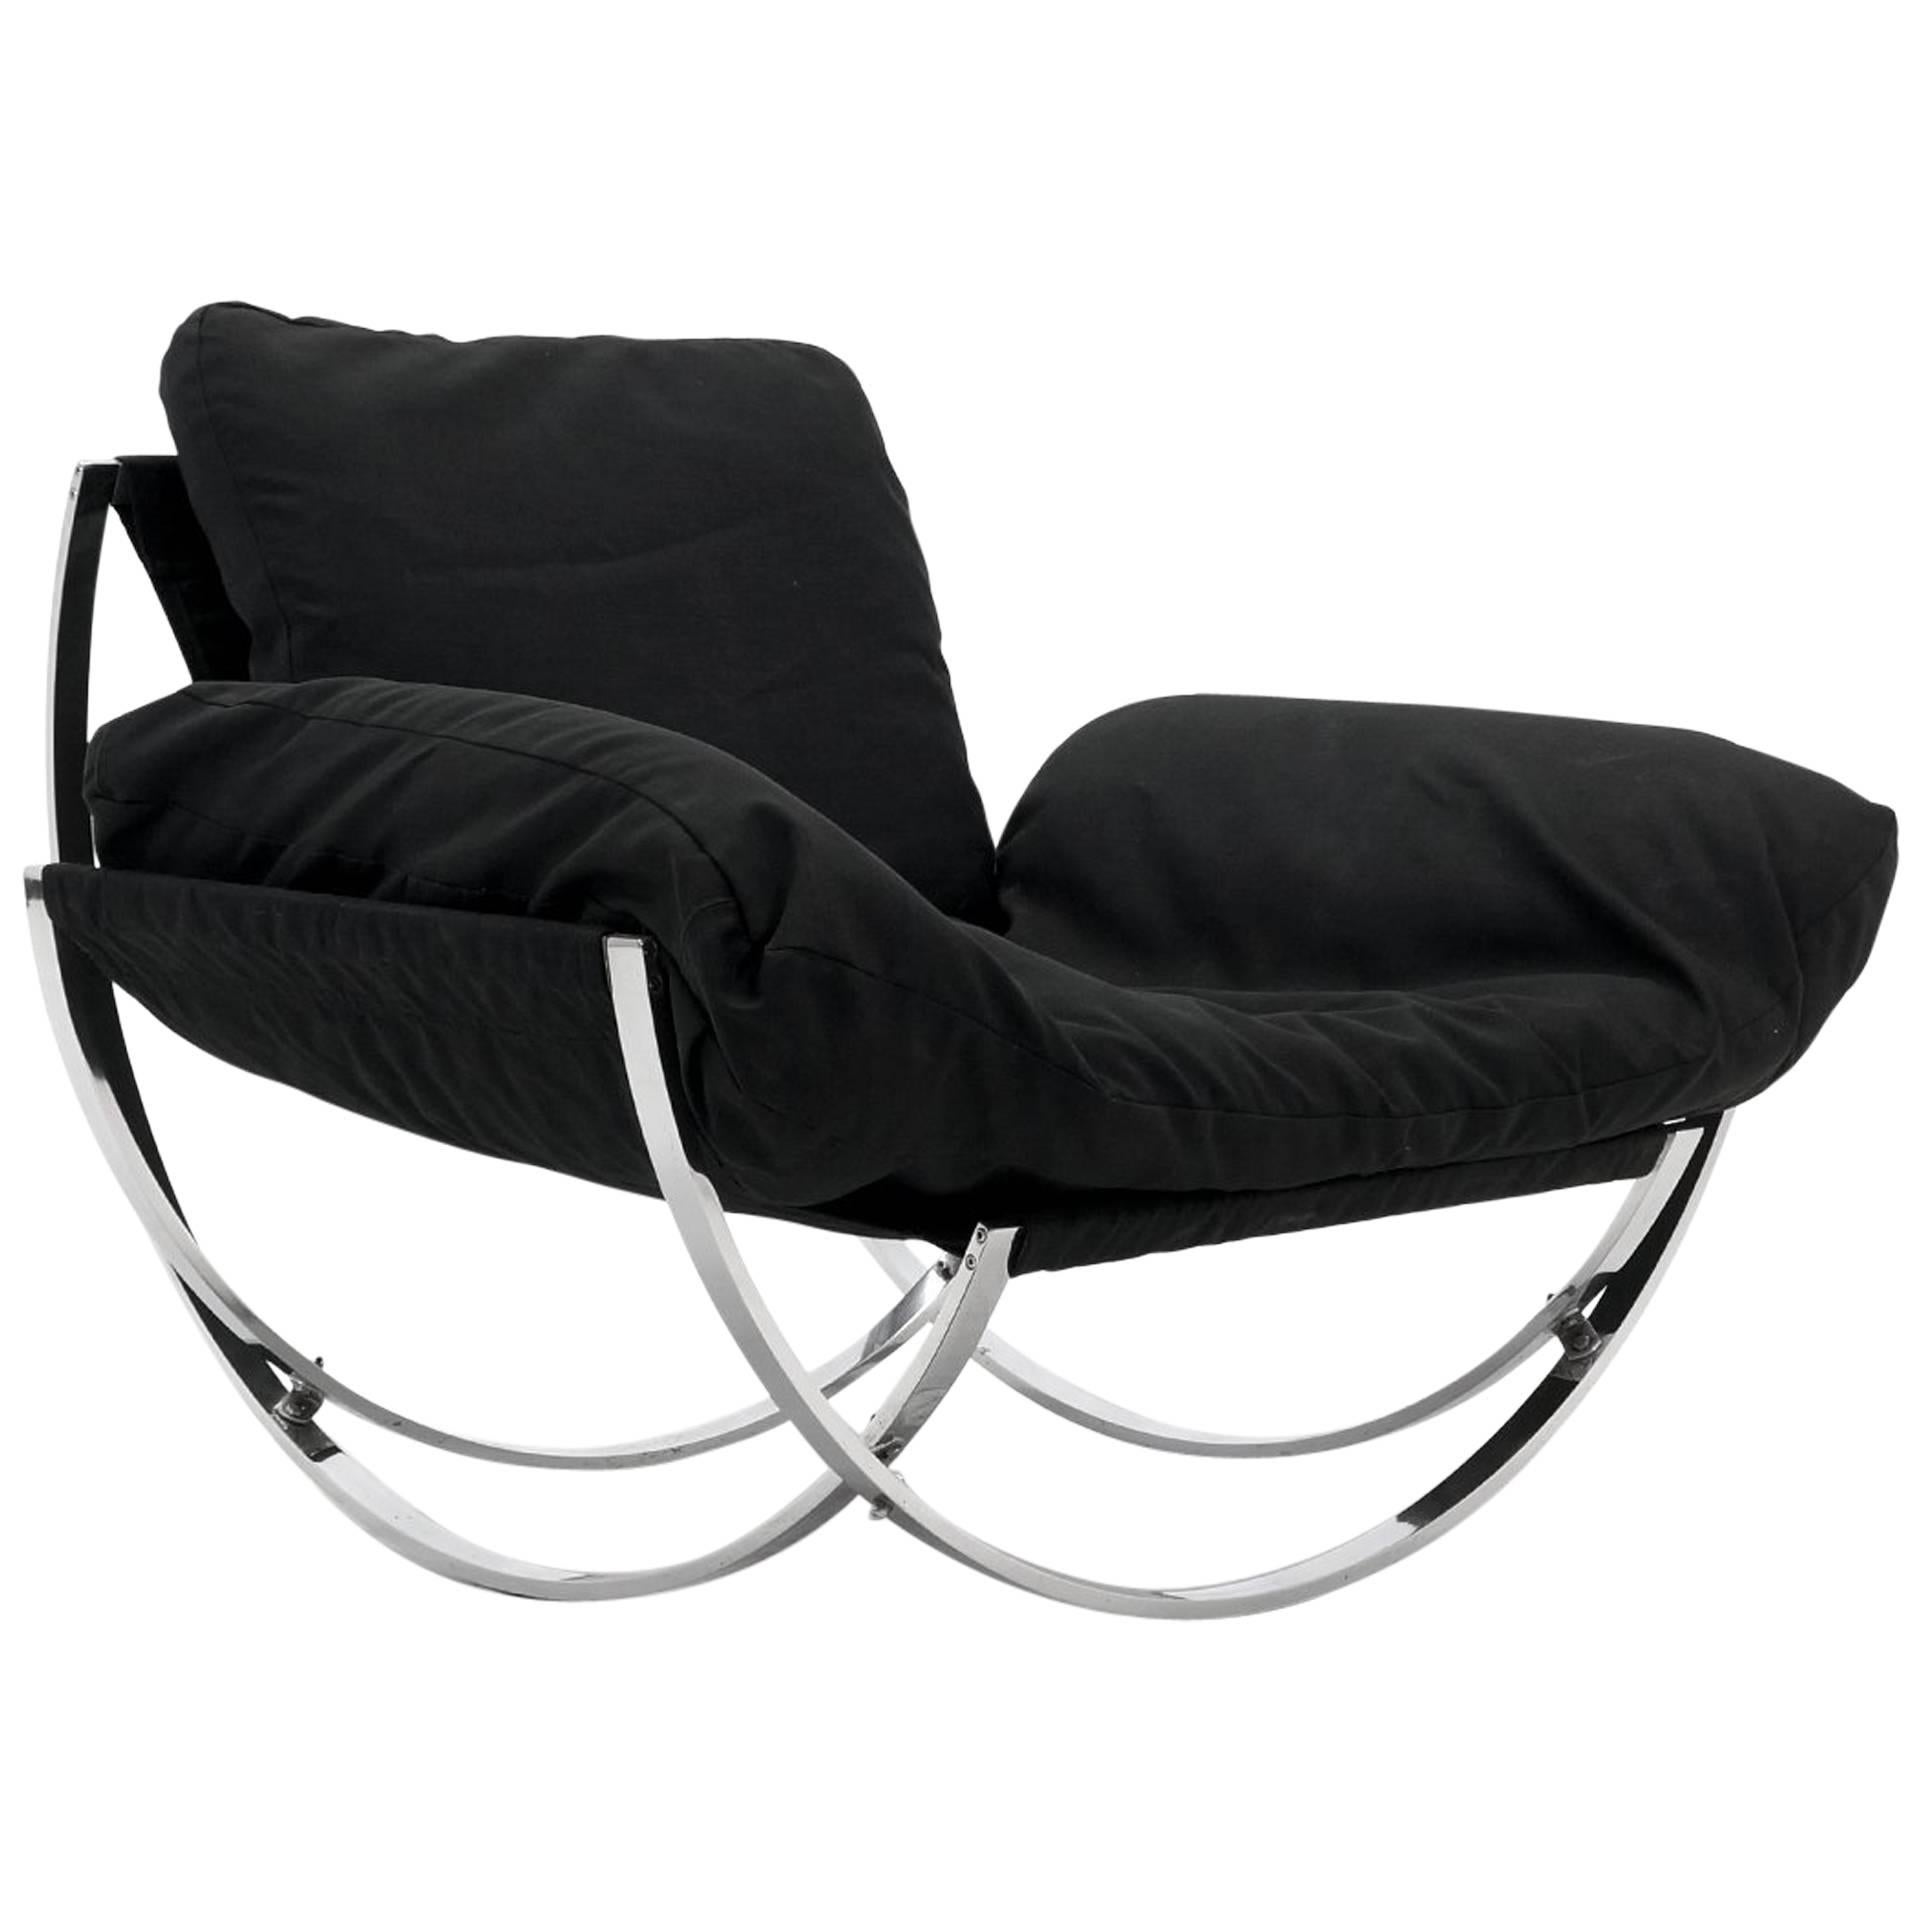 Chrome & canvas "Apollo" chair by Leonart Bender for Charlton, 1970s. For Sale